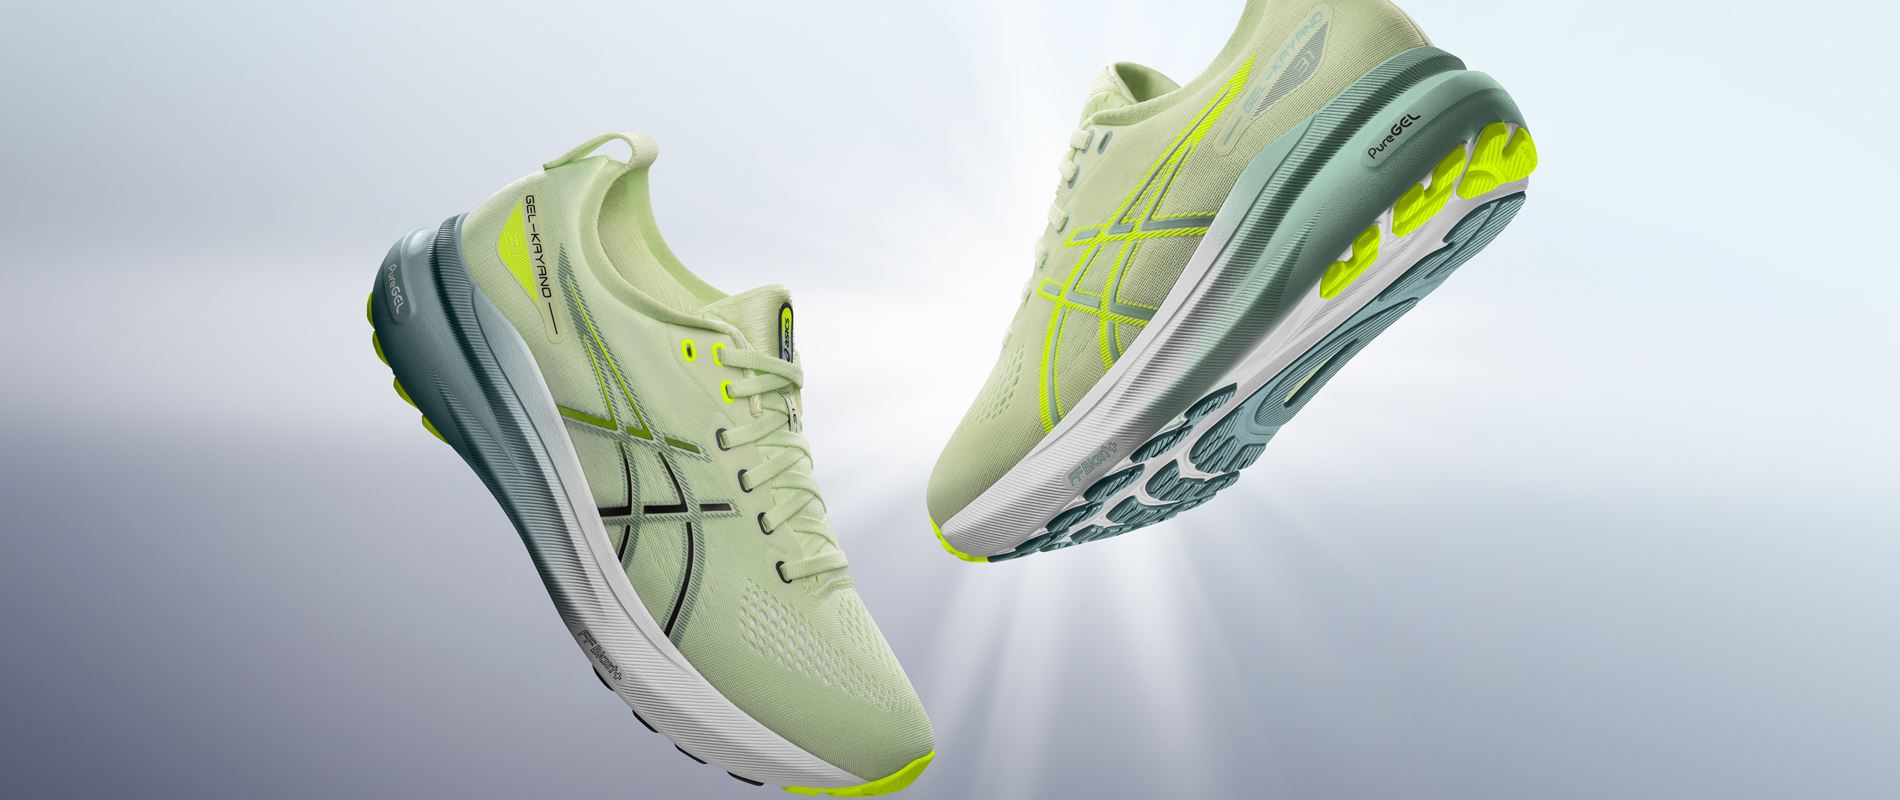 Stability never felt like this premium comfort in every step with ASICS GEL KAYANO 31 shoe